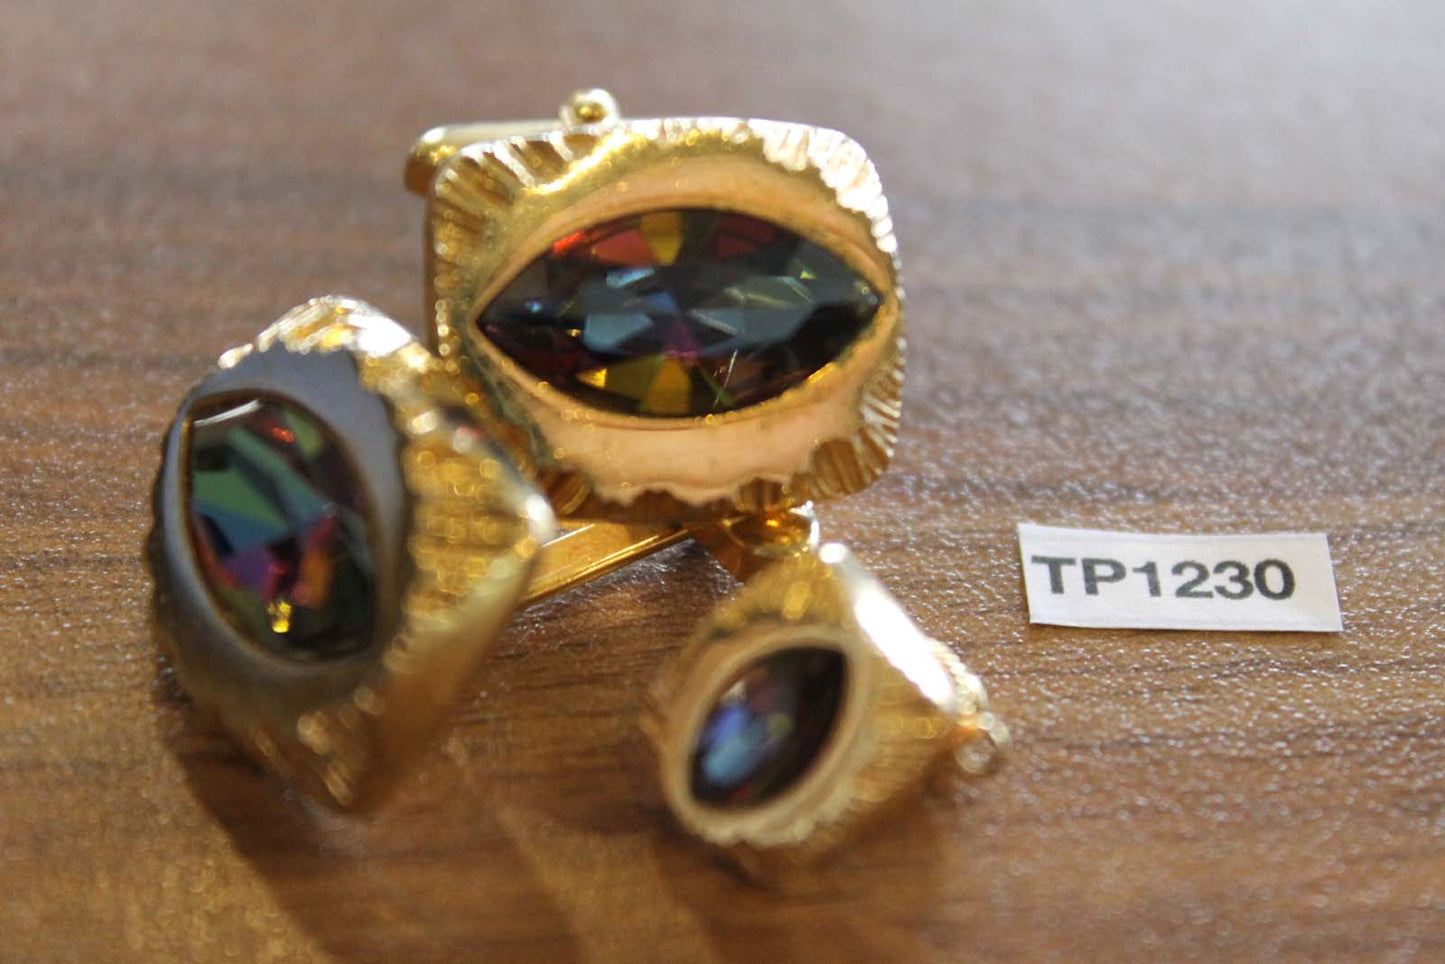 Vintage 1980s bling gold metal iridescent faceted glass stones cuff links & tie clip set